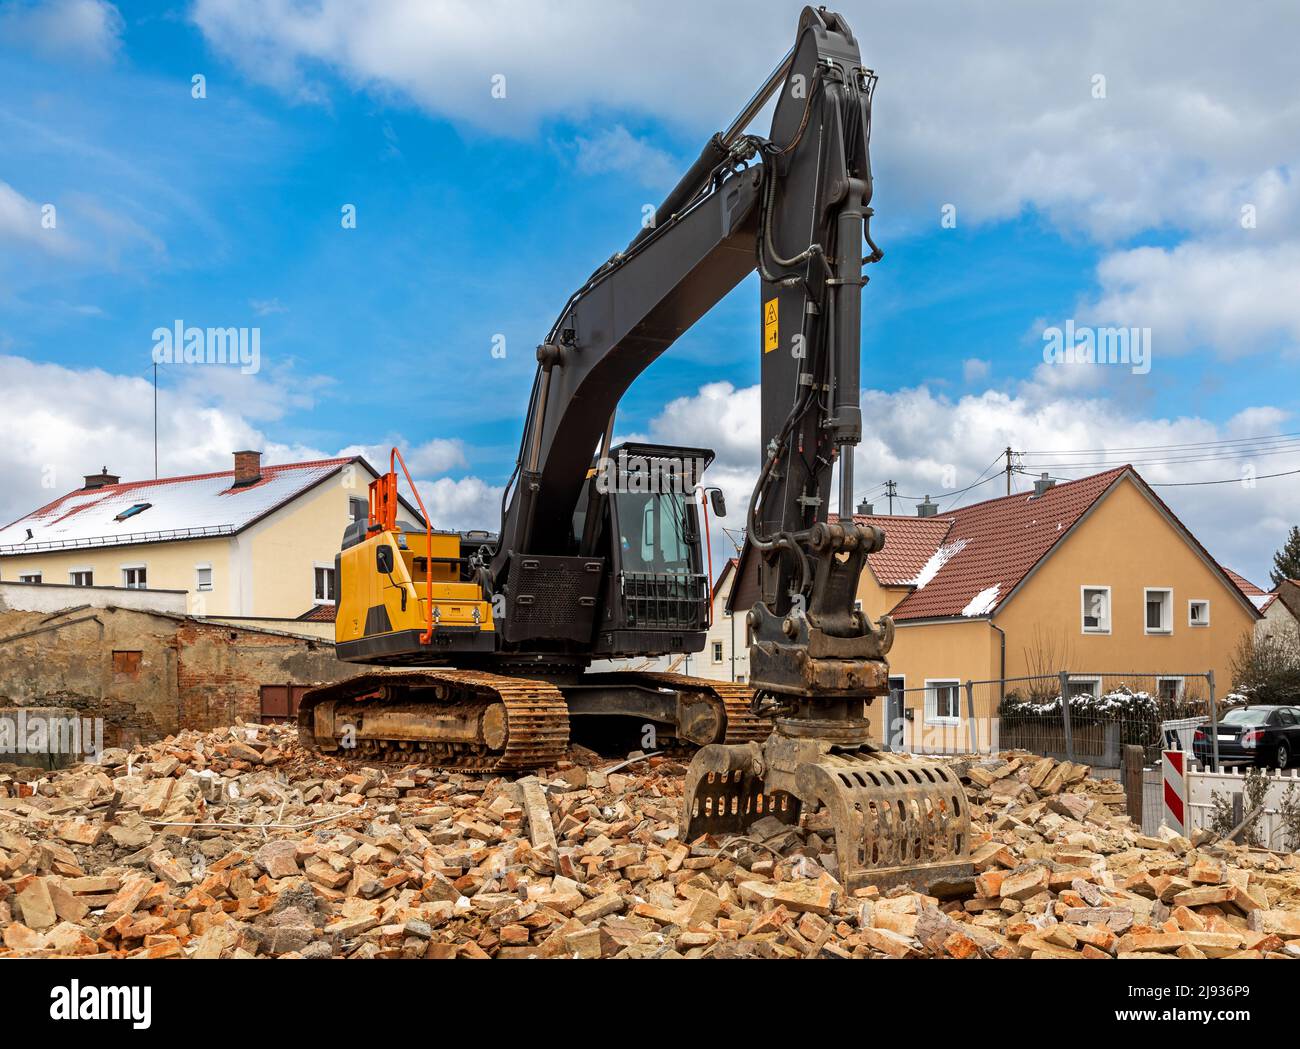 Excavator on debris of a demolished building in Germany Stock Photo